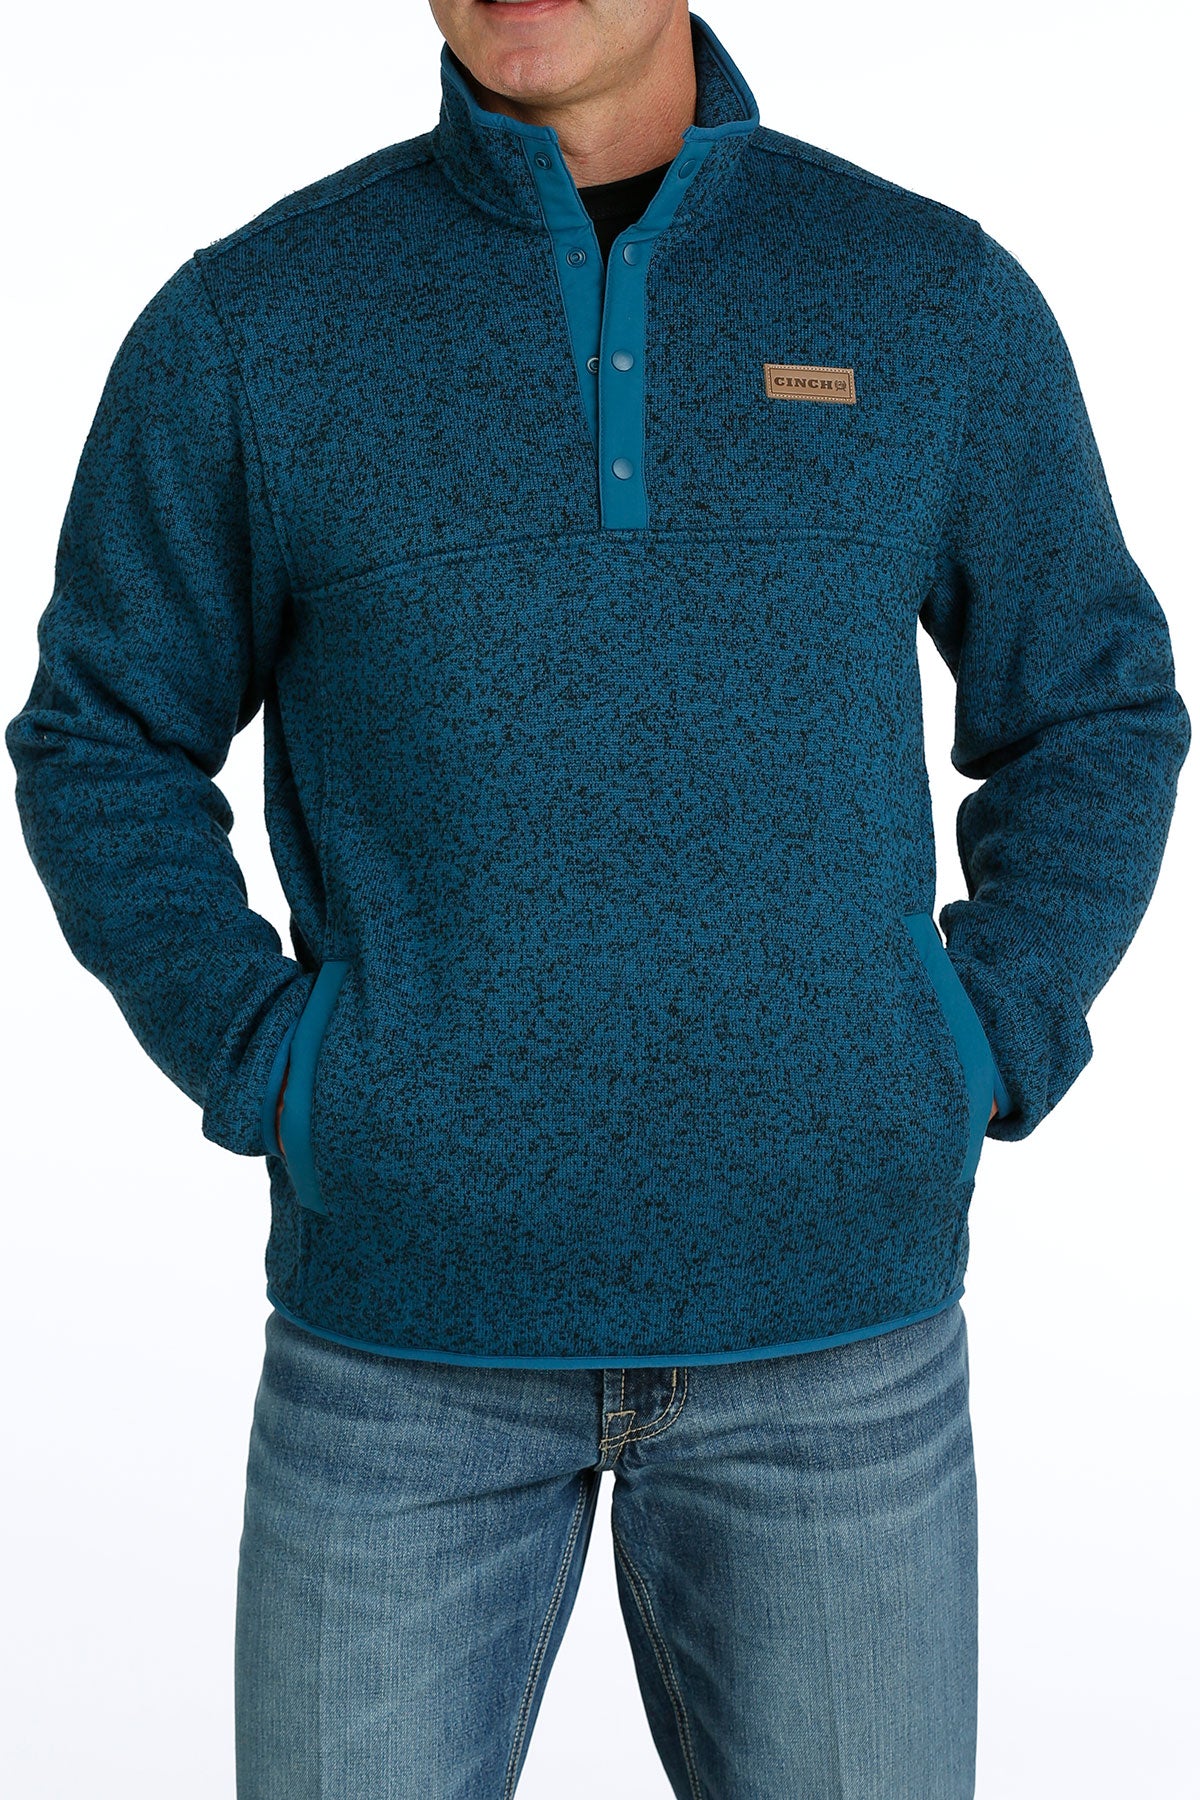 Cinch Men's Teal Quarter Snap Pullover Sweater  STYLE MWK1534005